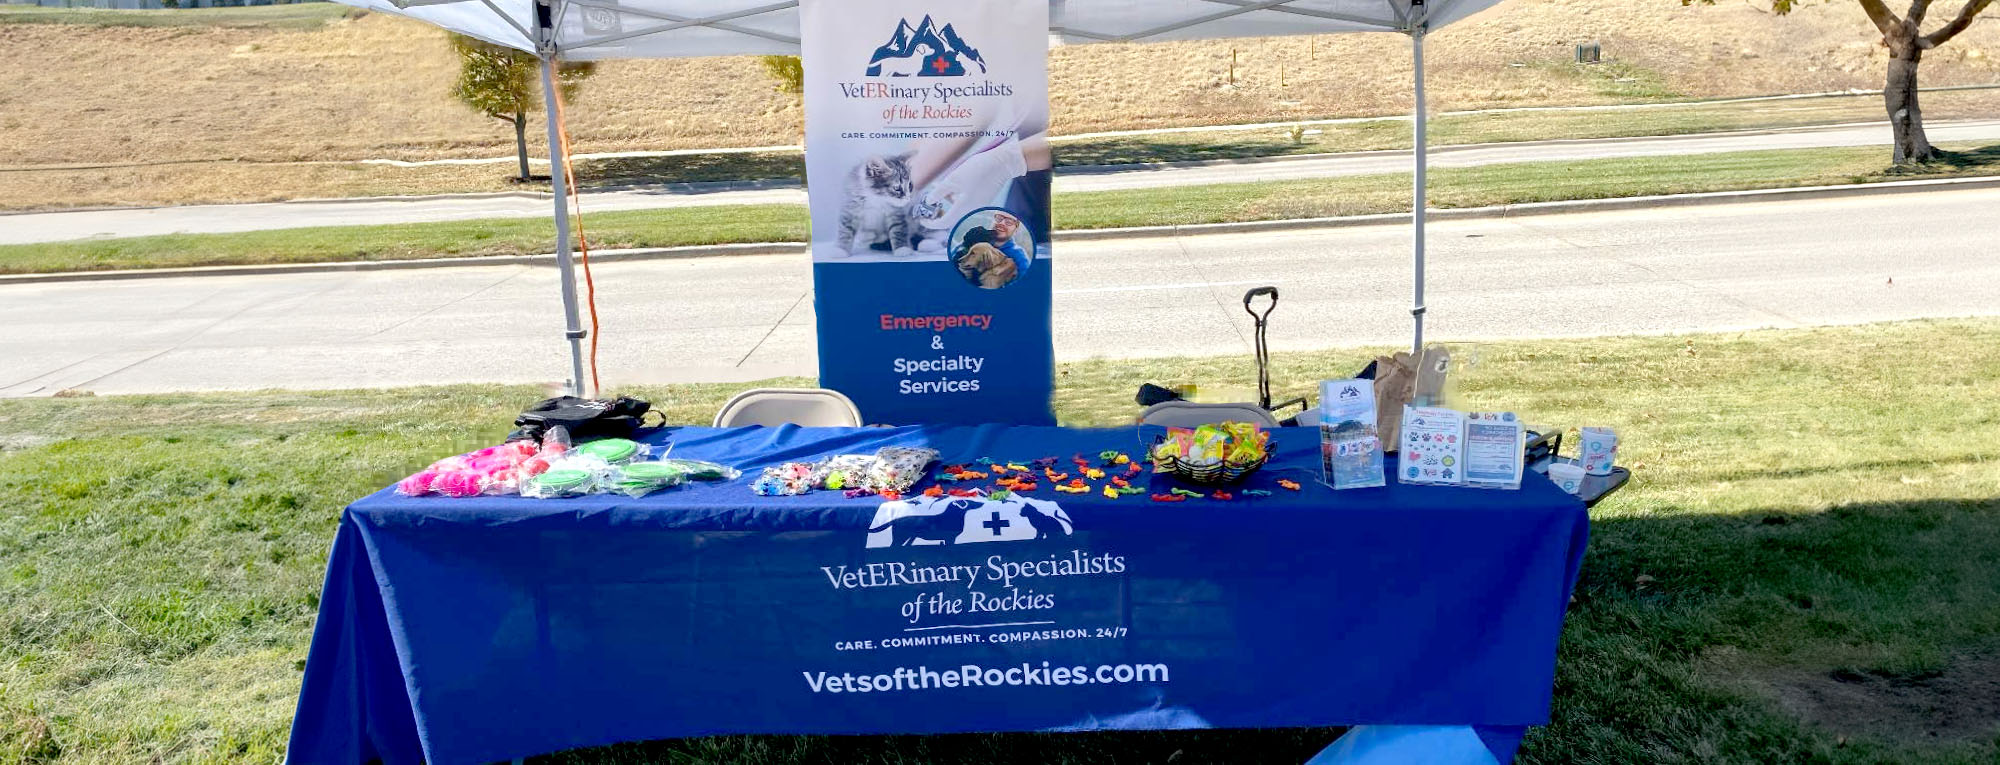 The Veterinary Specialists of the Rockies table at a community event in The Meadows neighborhood. Table with a blue table cloth and giveaway items in front of a standup banner.